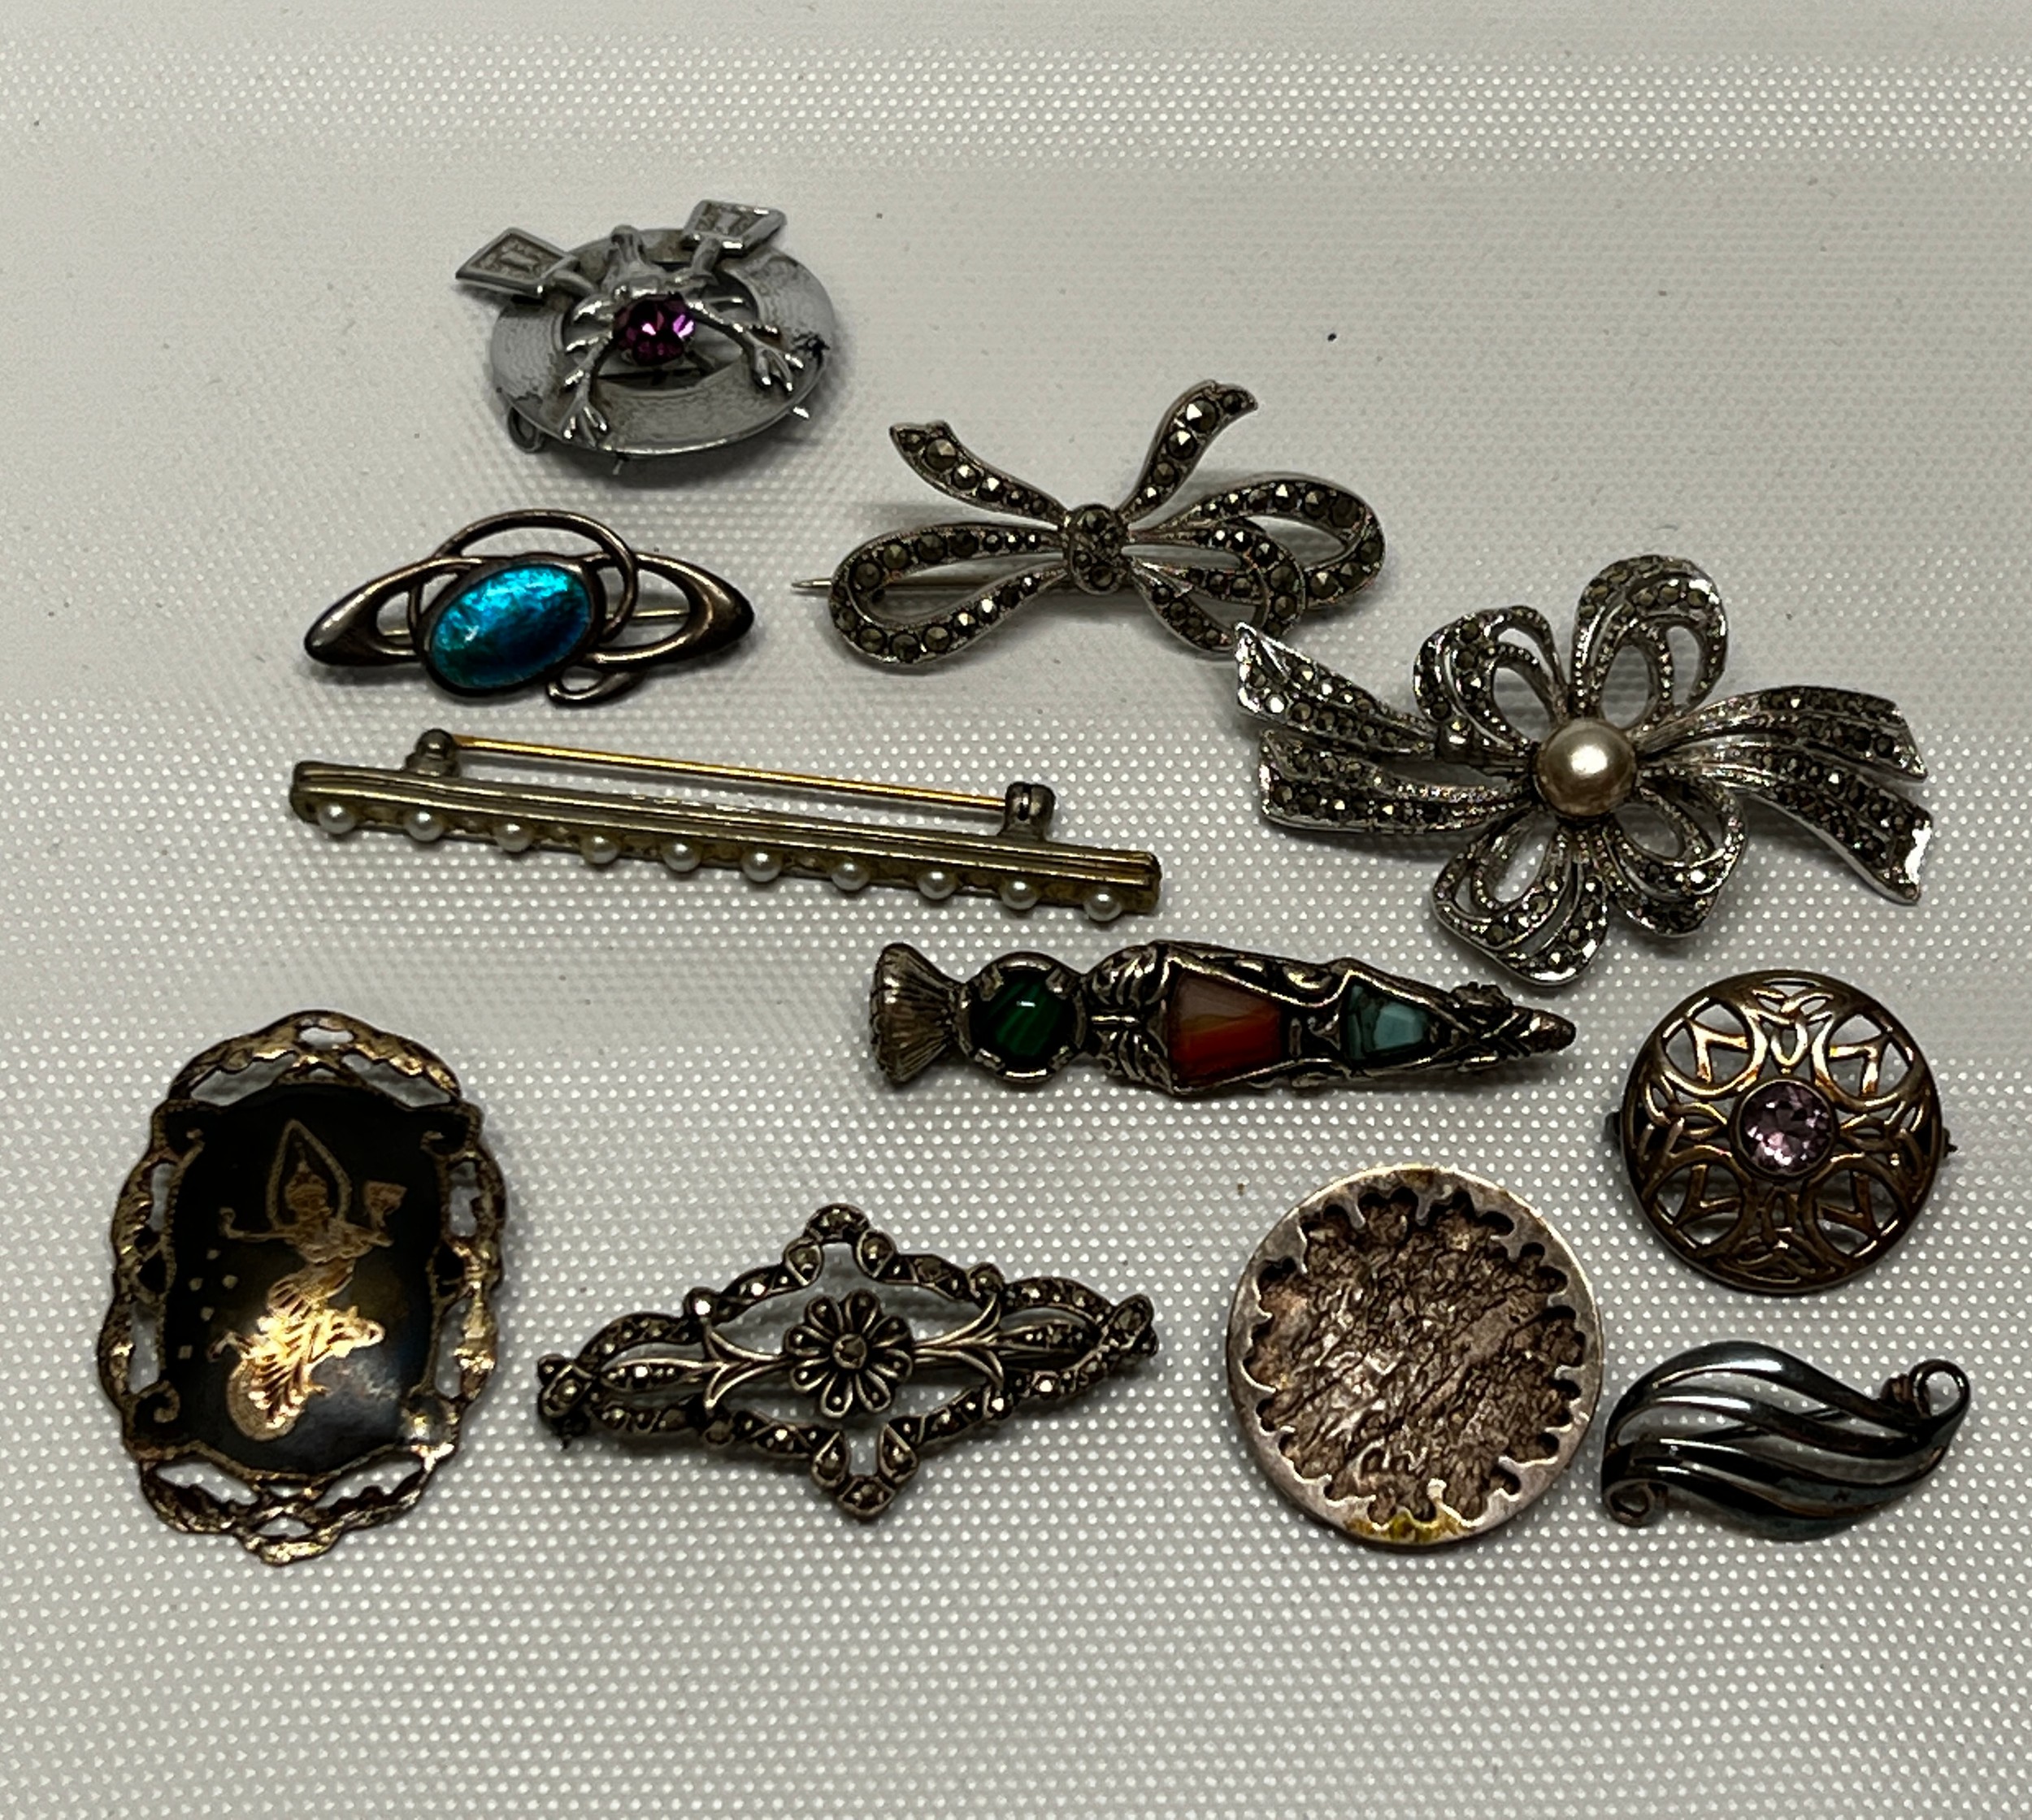 11 vintage brooches including silver